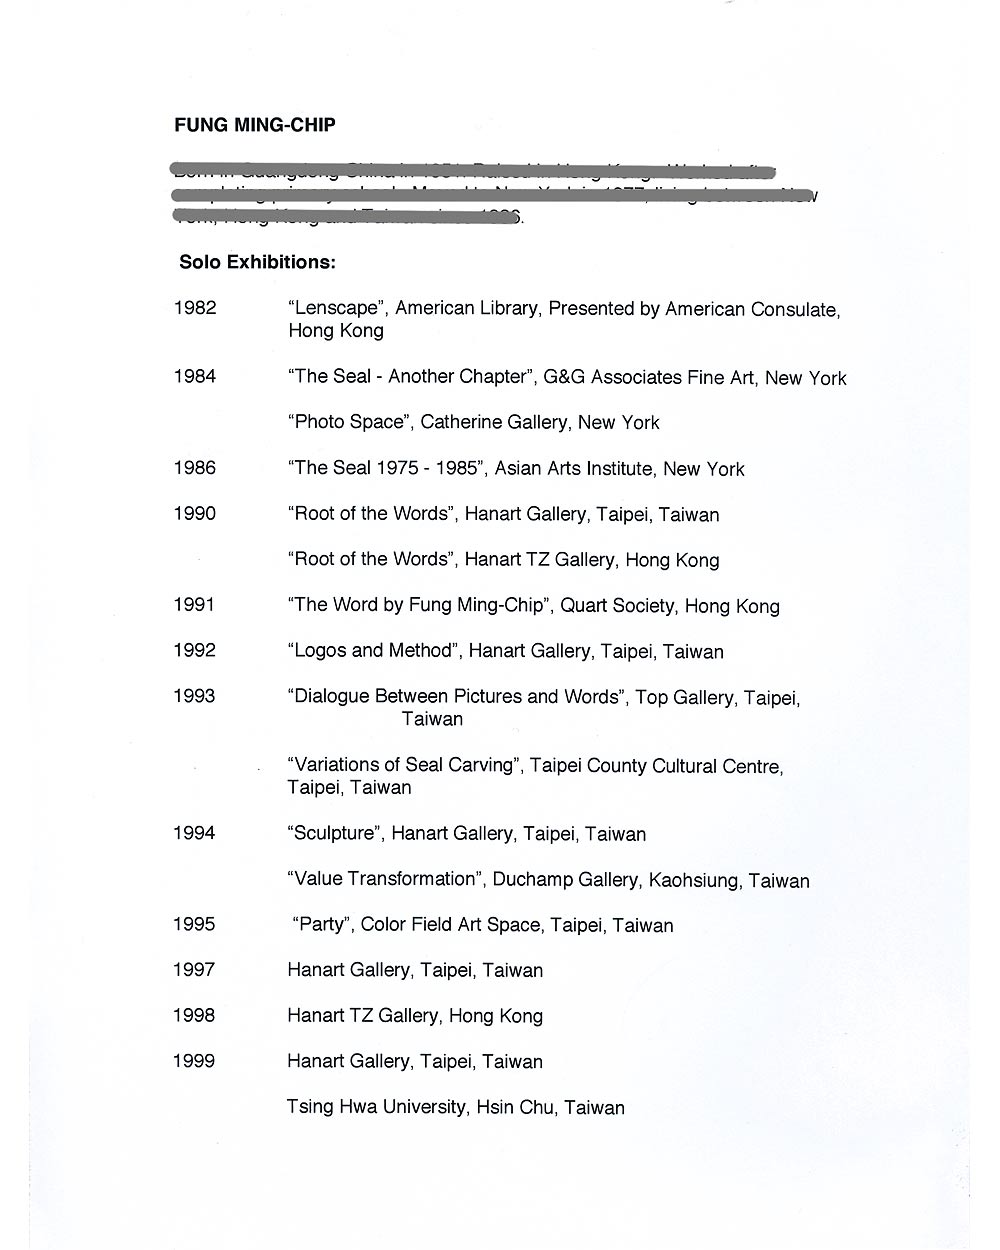 Ming Chip Fung's Resume, pg 1